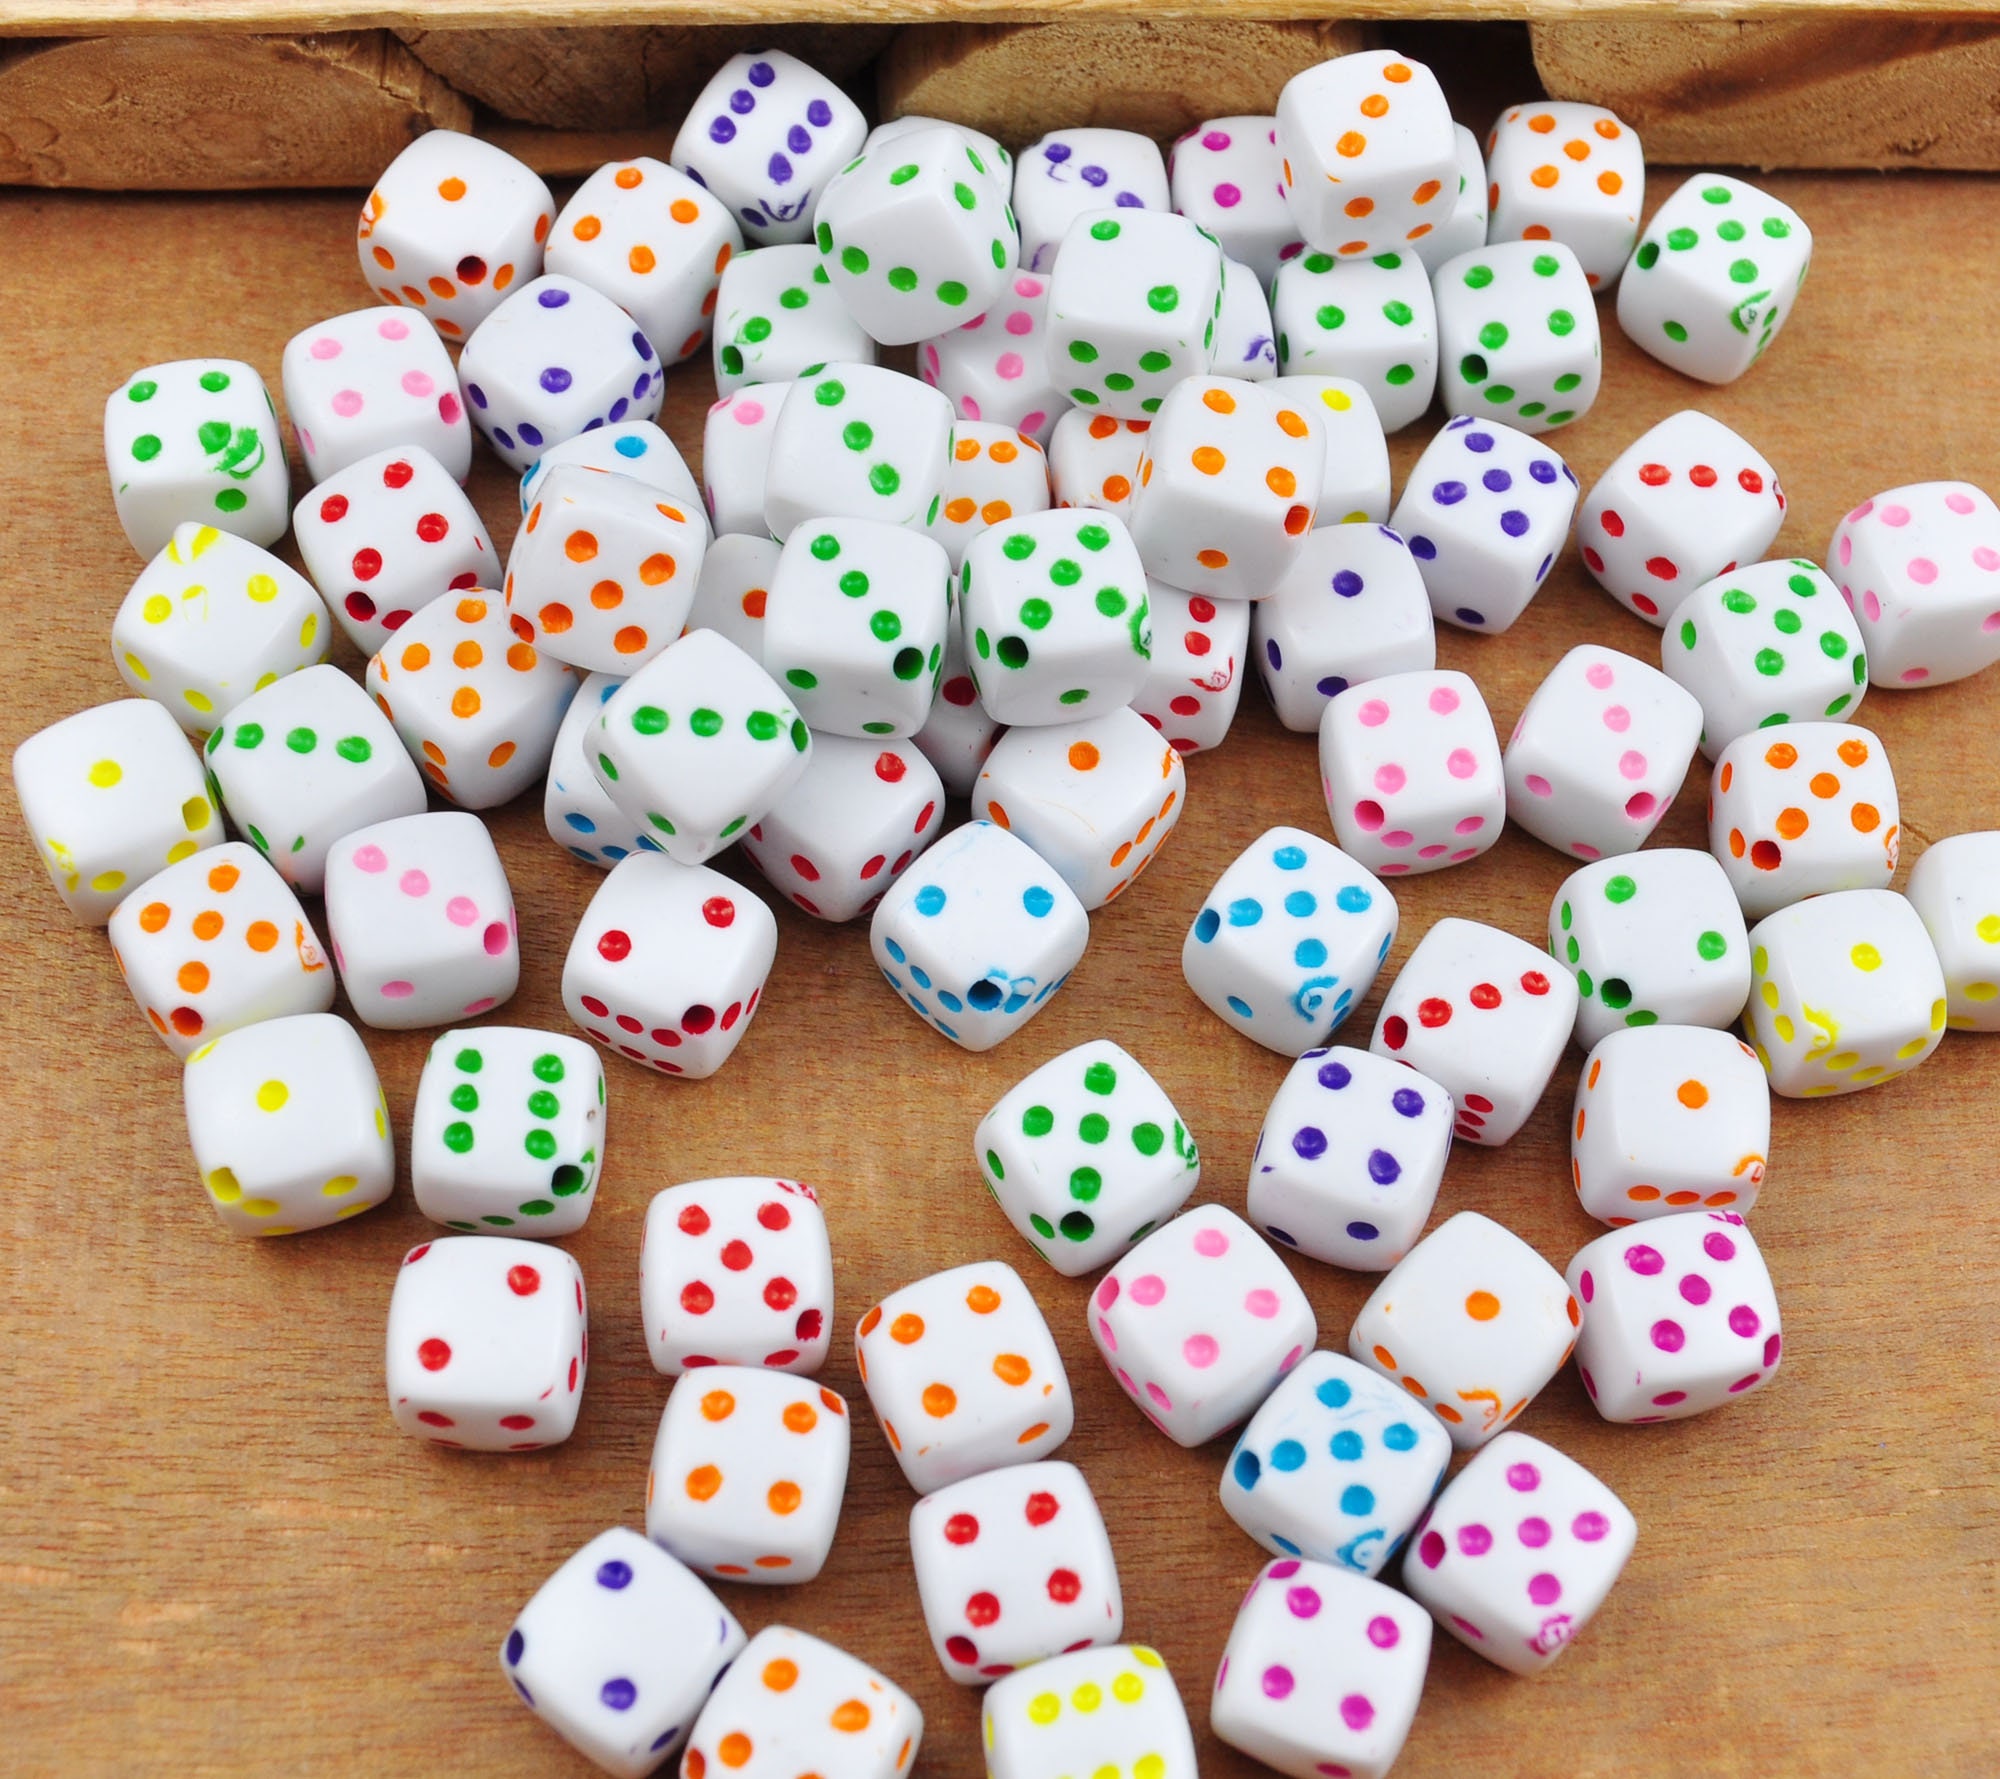 Silver/red Marbleized Dice Beads-dice-silred-marble